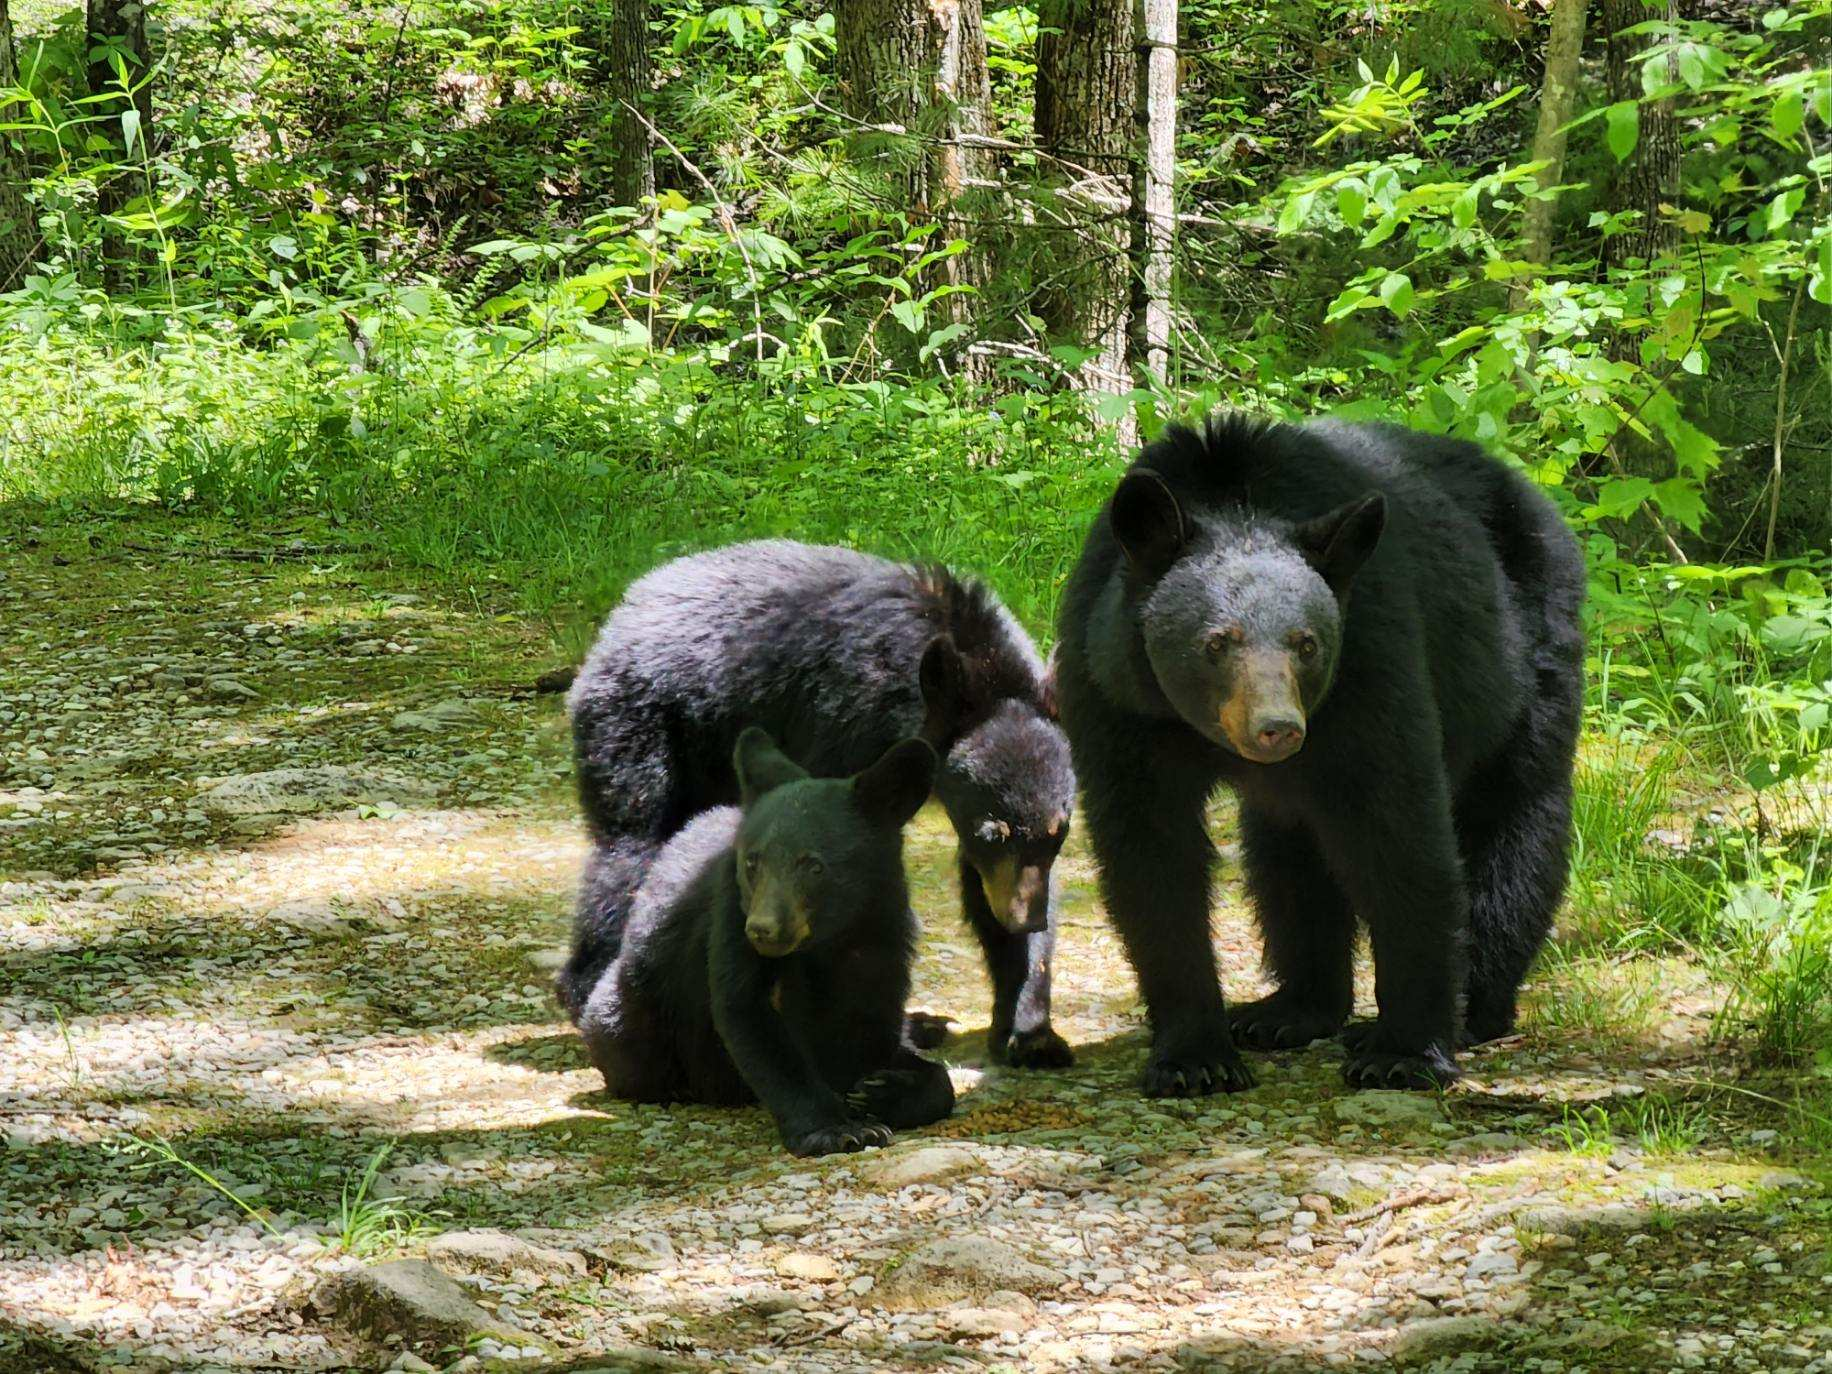 Taken in May of 2022, this photo shows 3 black bears in Great Smoky Mountains National Park that are eating dog food a person intentionally placed on the ground to attract bears